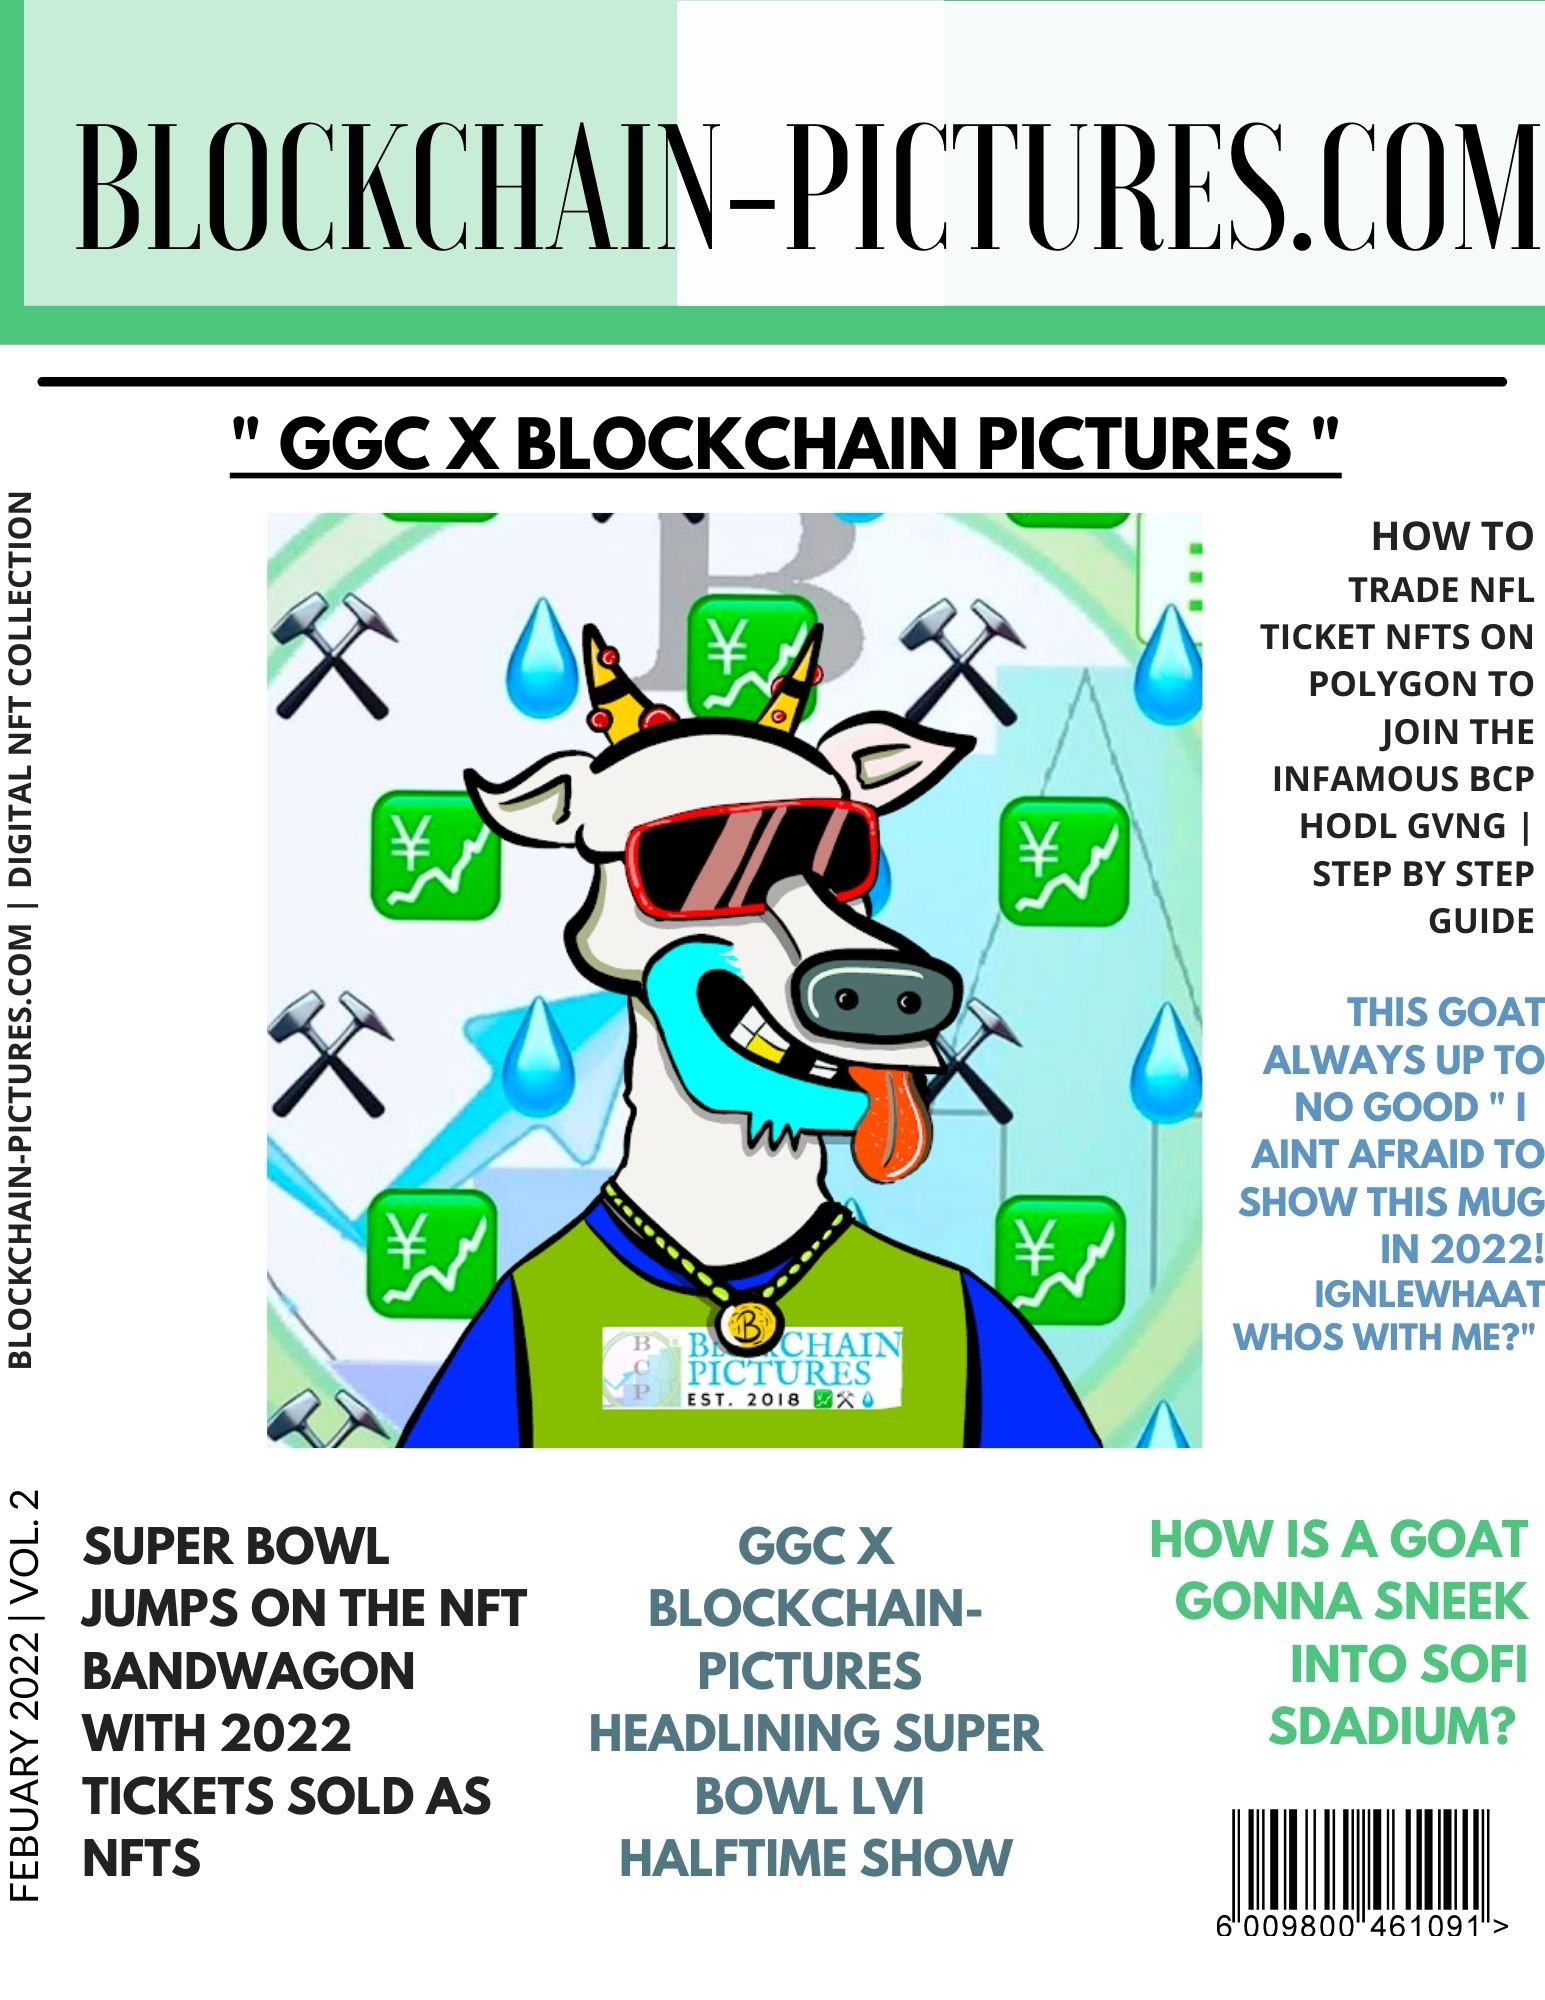 Febuary 2022 Vol.1 | @GREATEST GOATS CLUB X BlockChain-Pictures AOTM